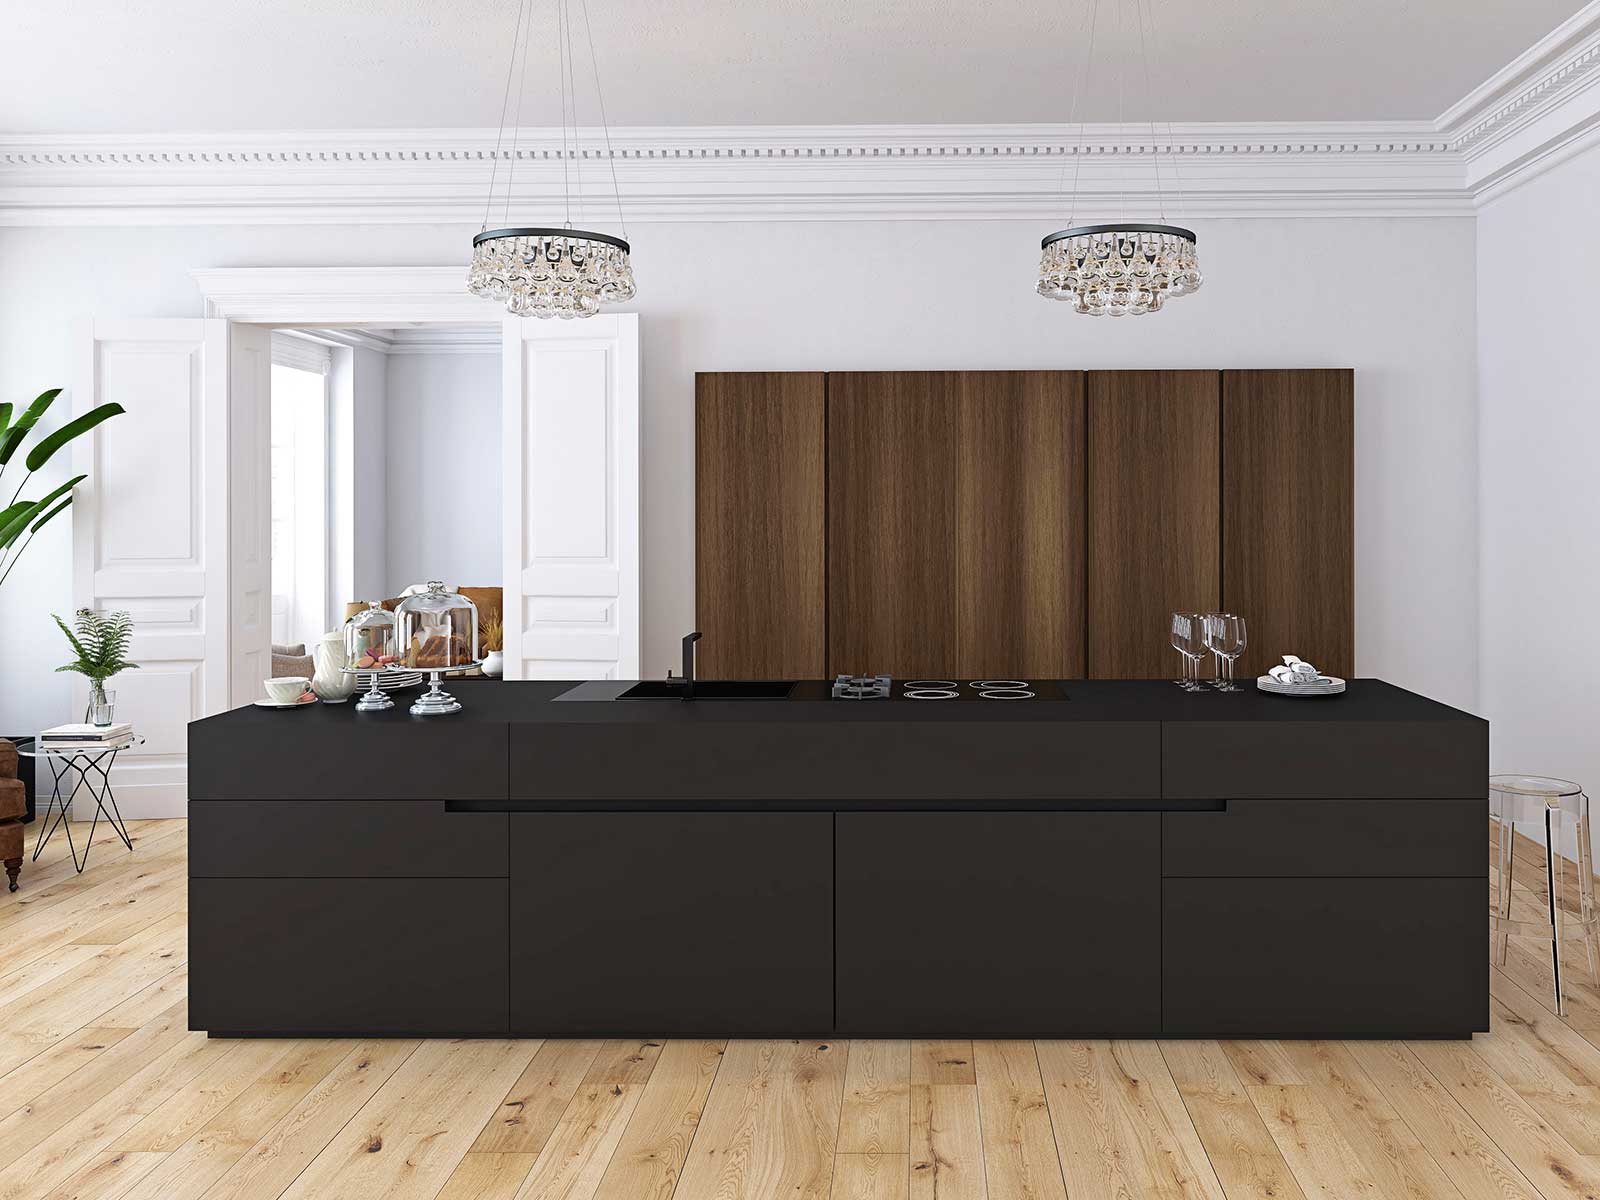 Fantastic contemporary kitchens by SHB